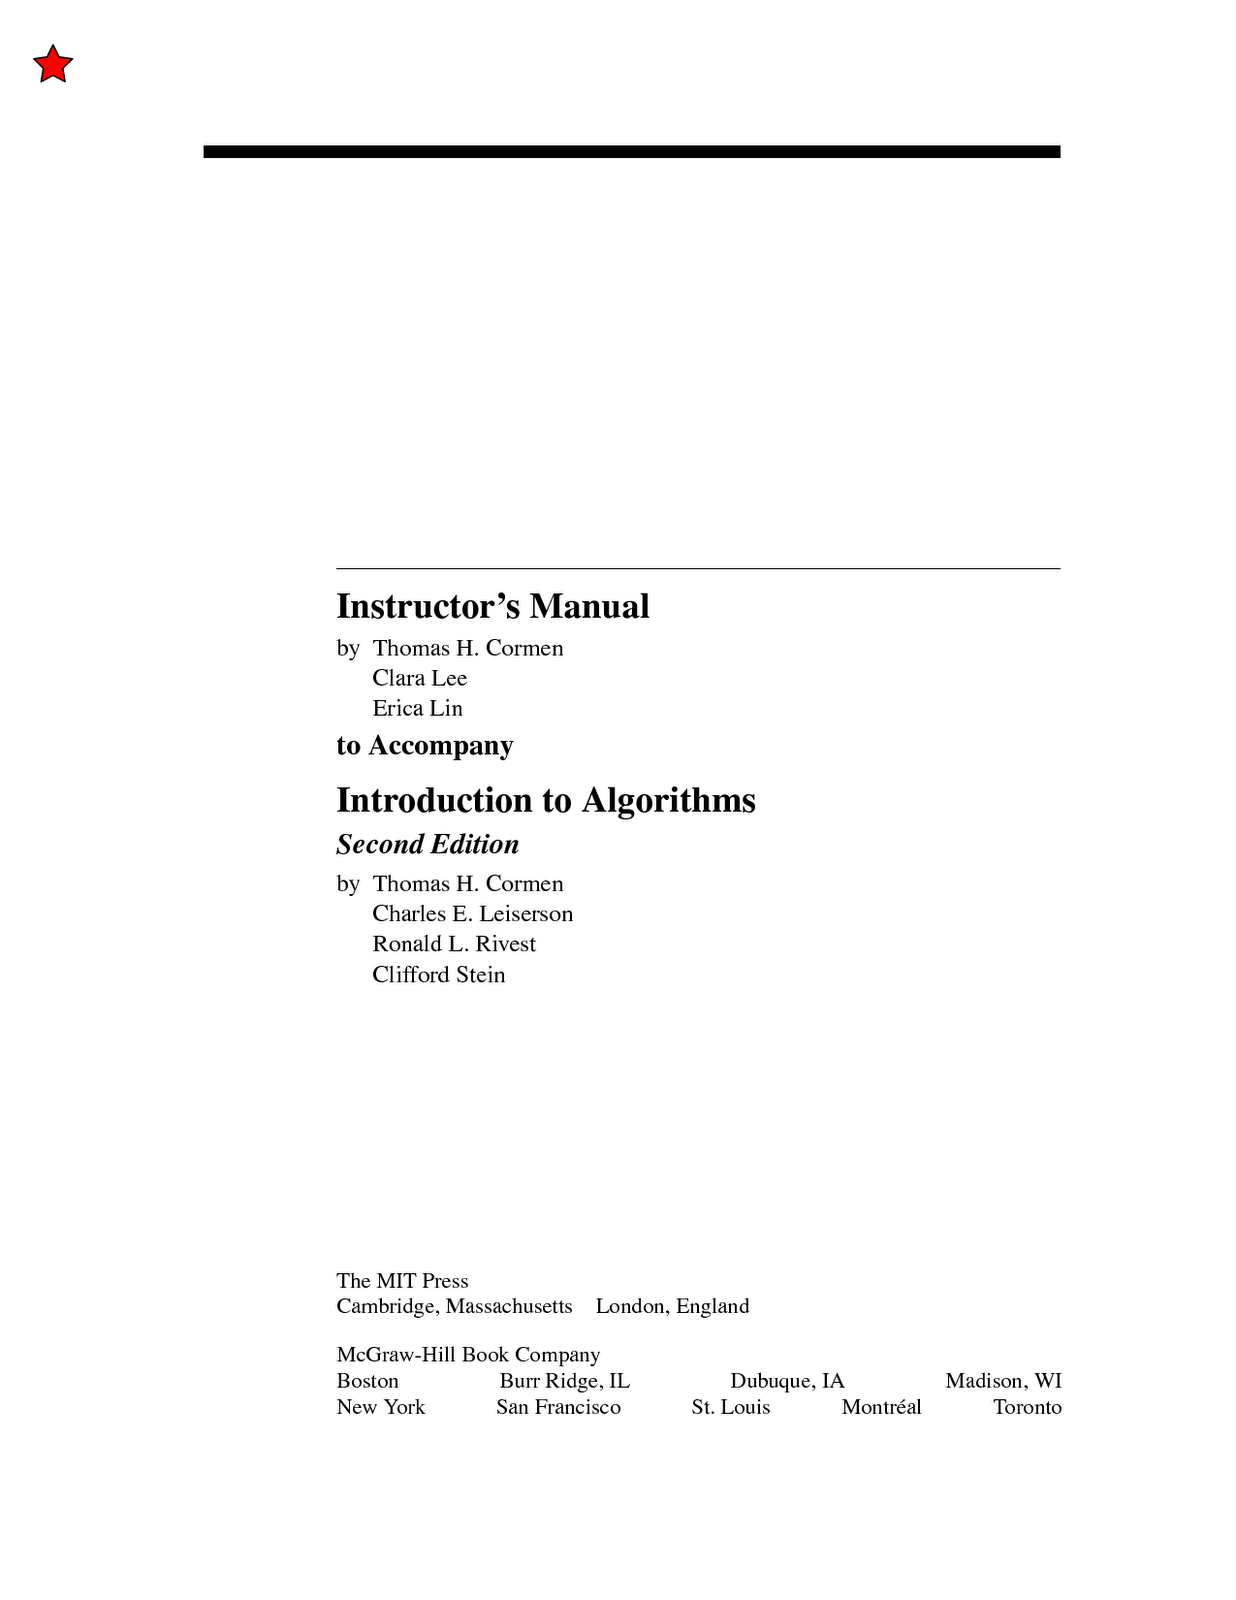 Asymptotic Notation And Recurrences Pdf